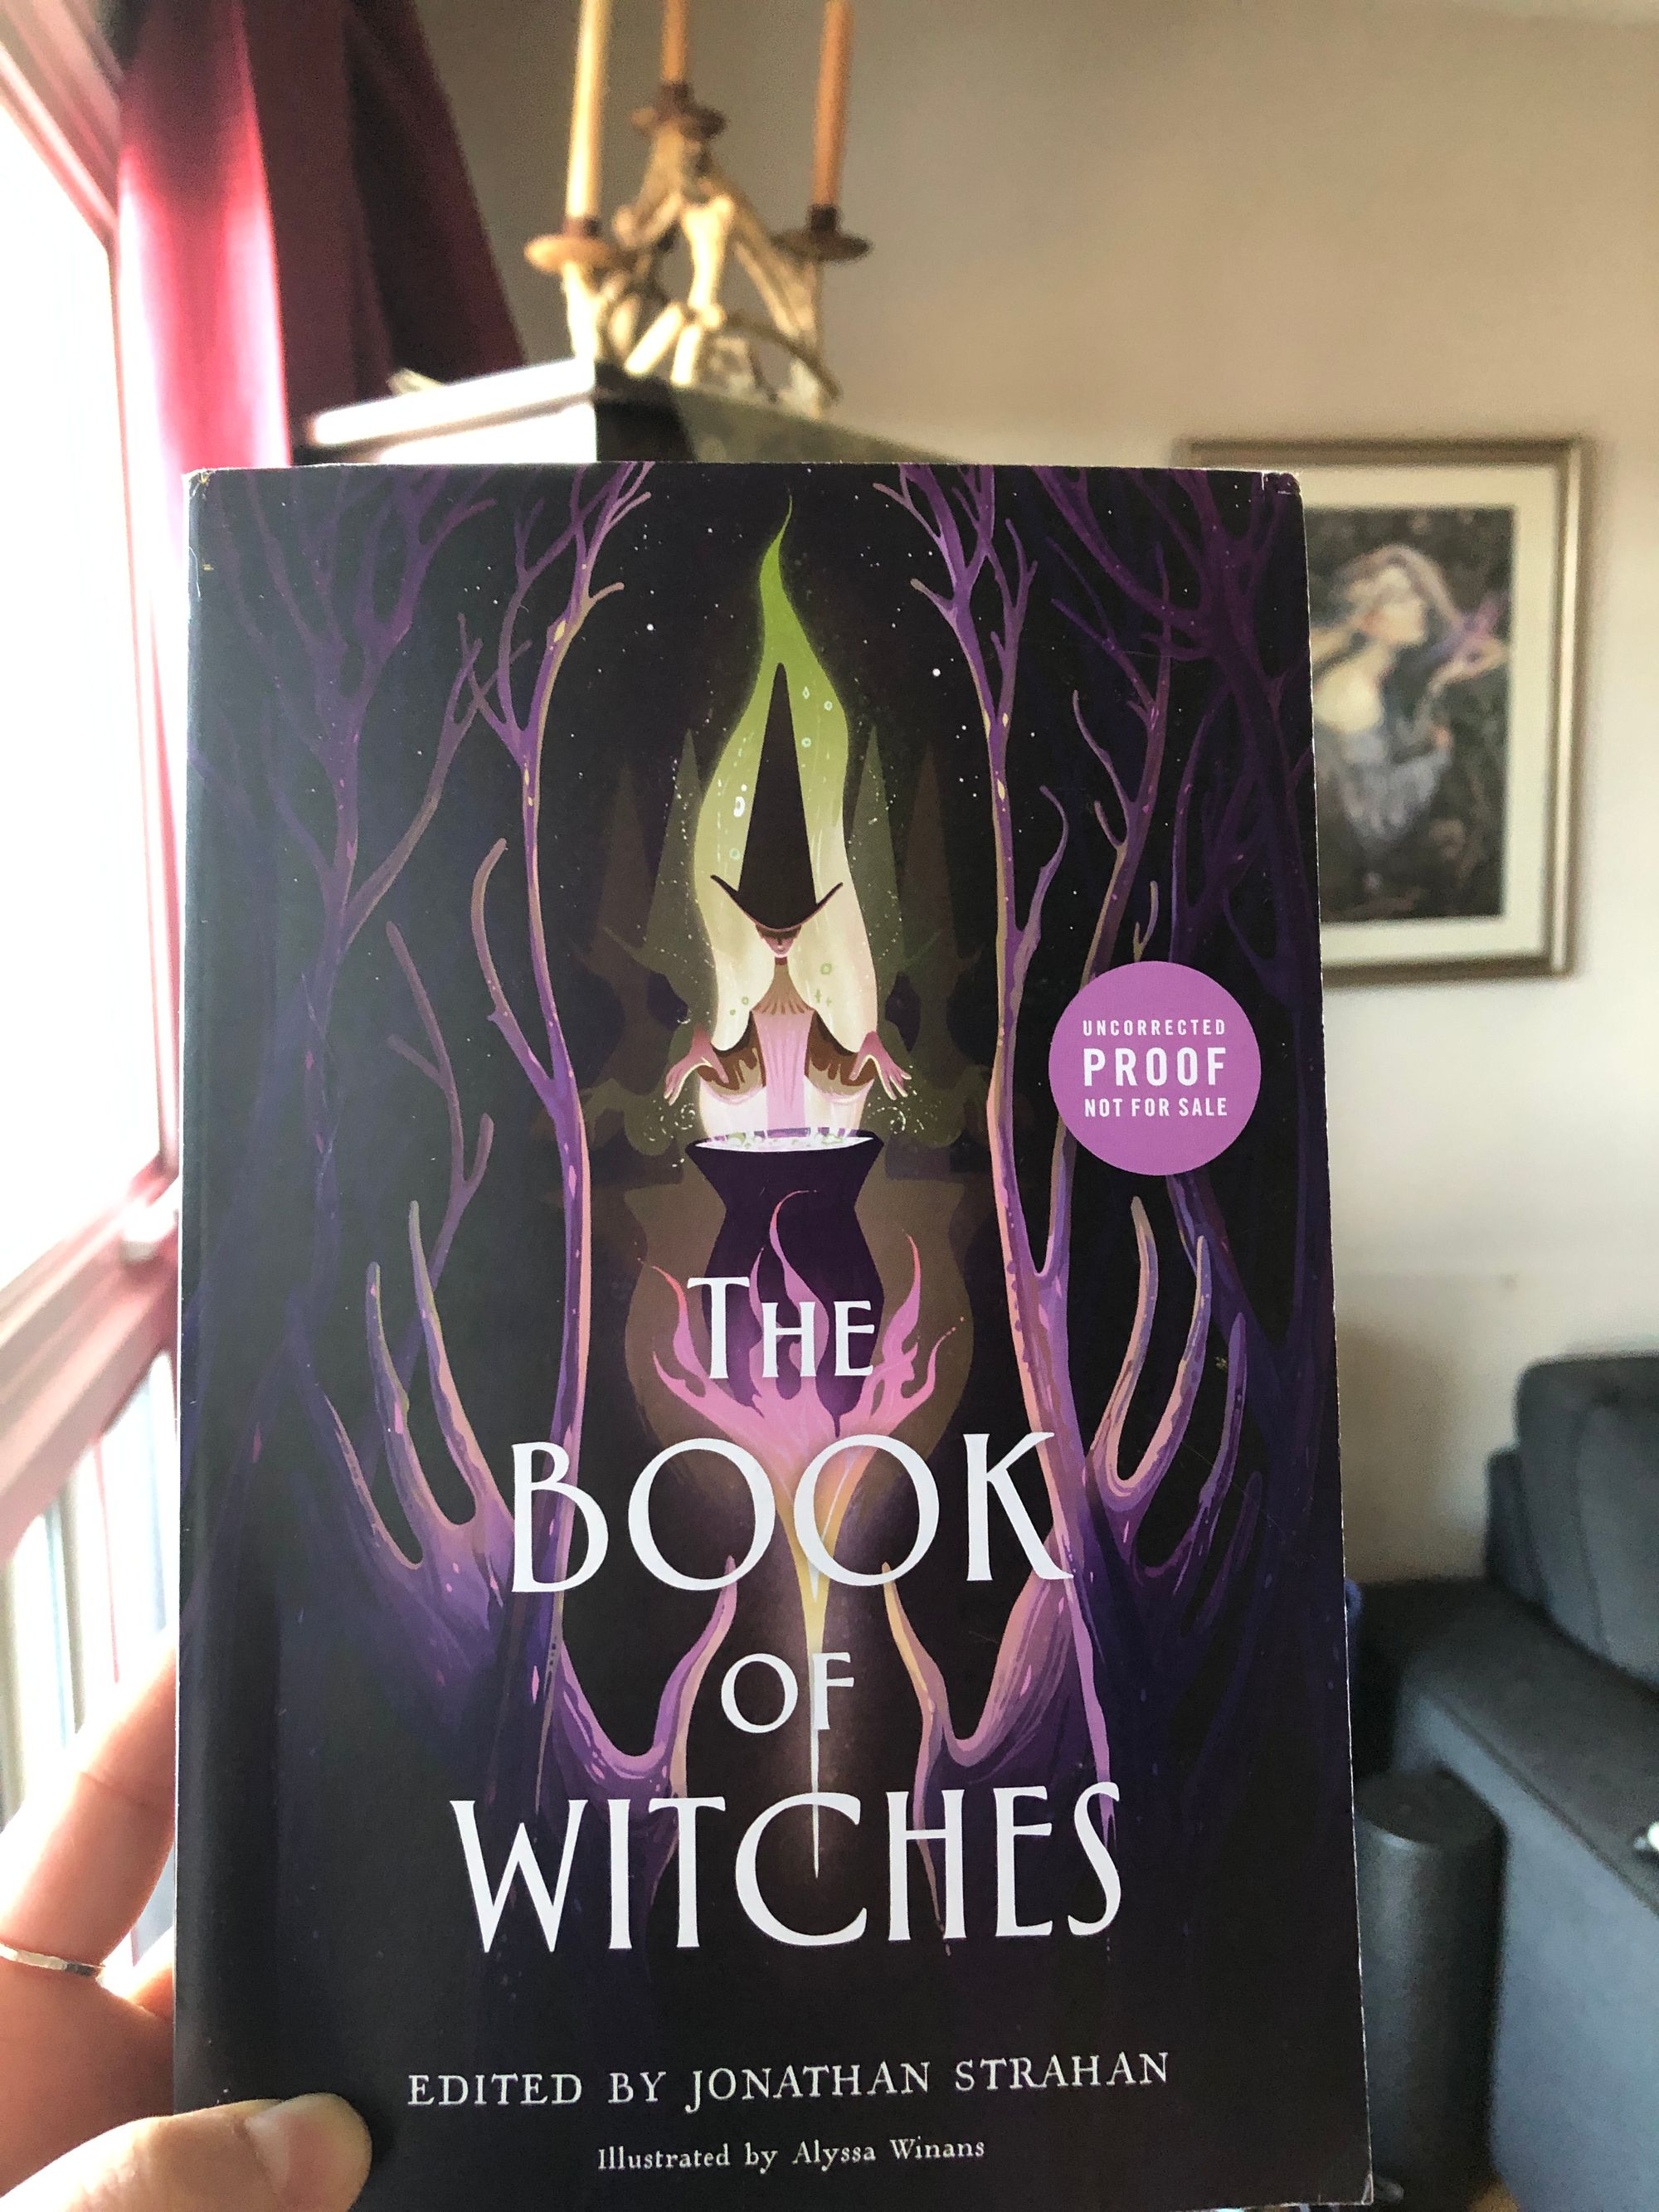 Close up on the cover of THE BOOK OF WITCHES, edited by Jonathan Strahan, held up in my hand. The illustration by Alyssa Winans depicts a stylized witch presiding over a bubbling cauldron in a clearing in the woods, all drawn in a slender, spooky cartoonish style in purples and acidic greens; the woods in the foreground look like slender-fingered hands reaching towards the central figure, whose own hands hover over the cauldron, from which a wispy green glow emanates, framing her.